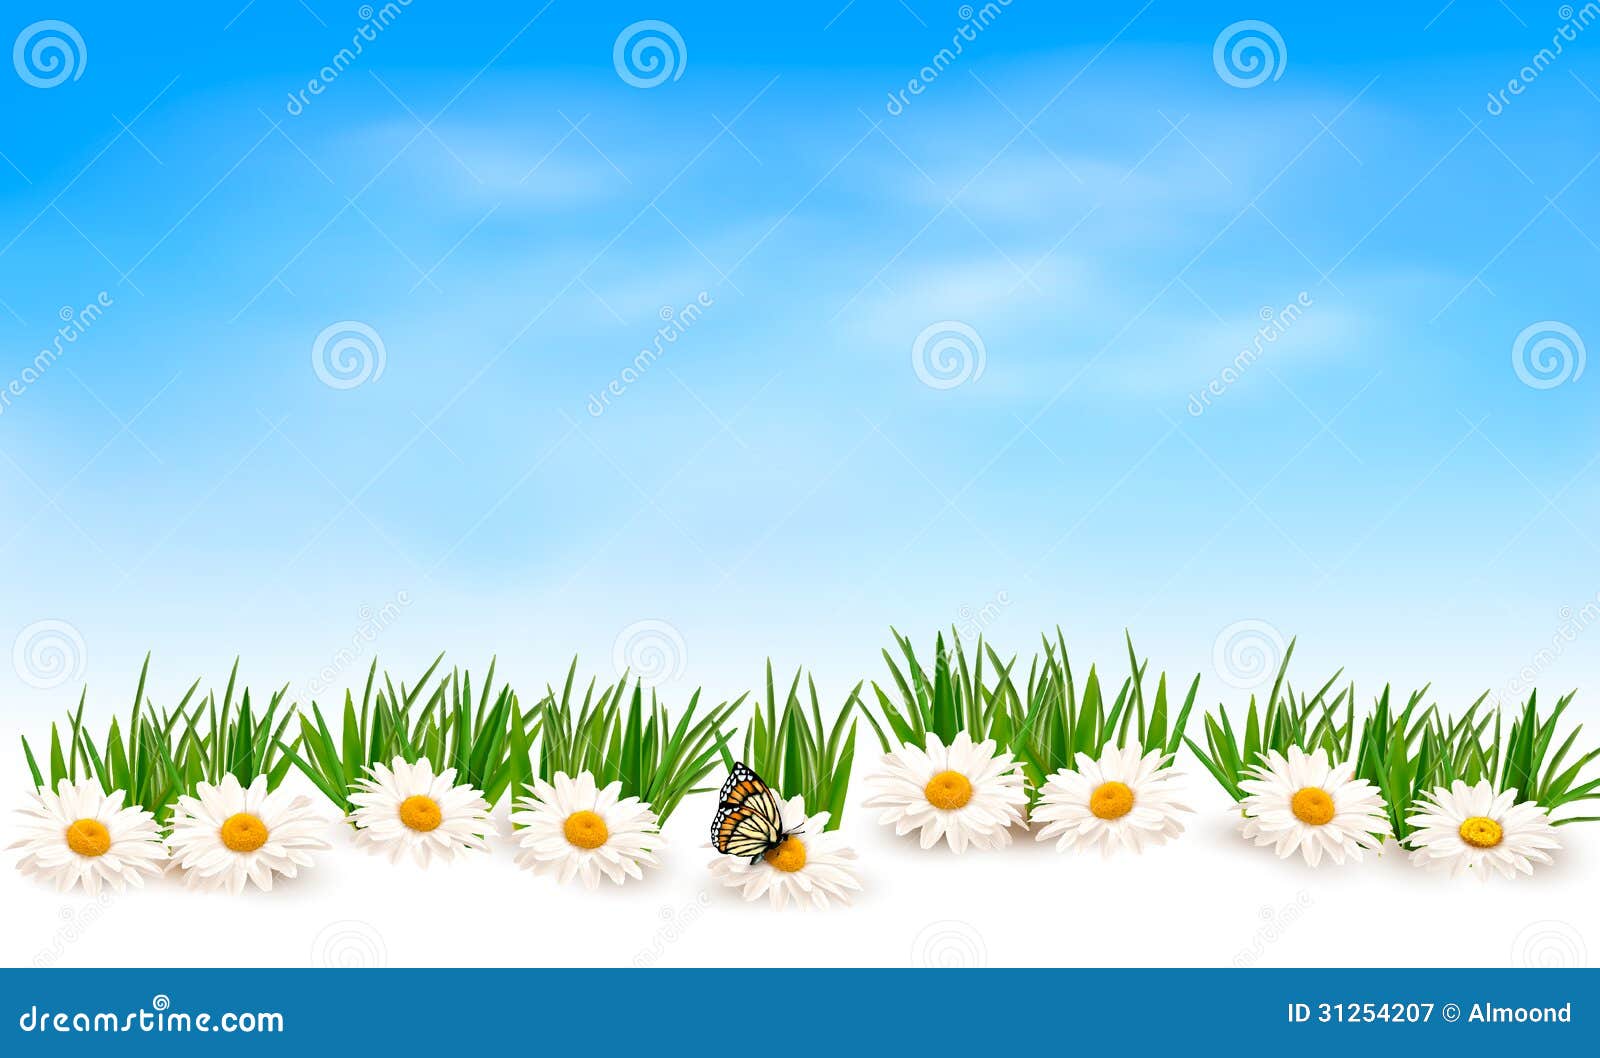 nature photography clipart - photo #31